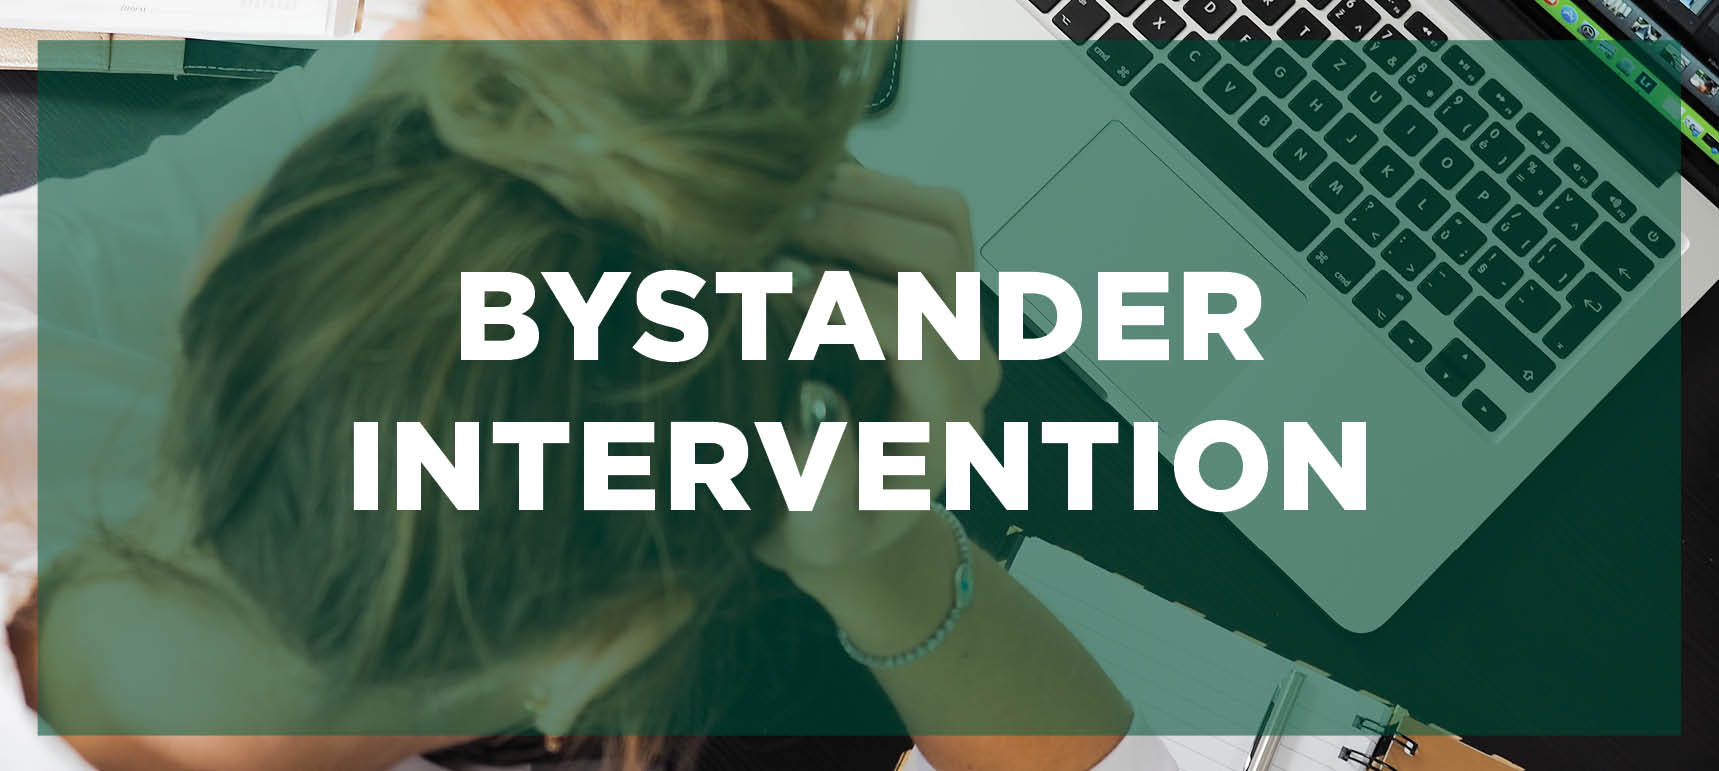 Learn more about the Bystander Intervention program